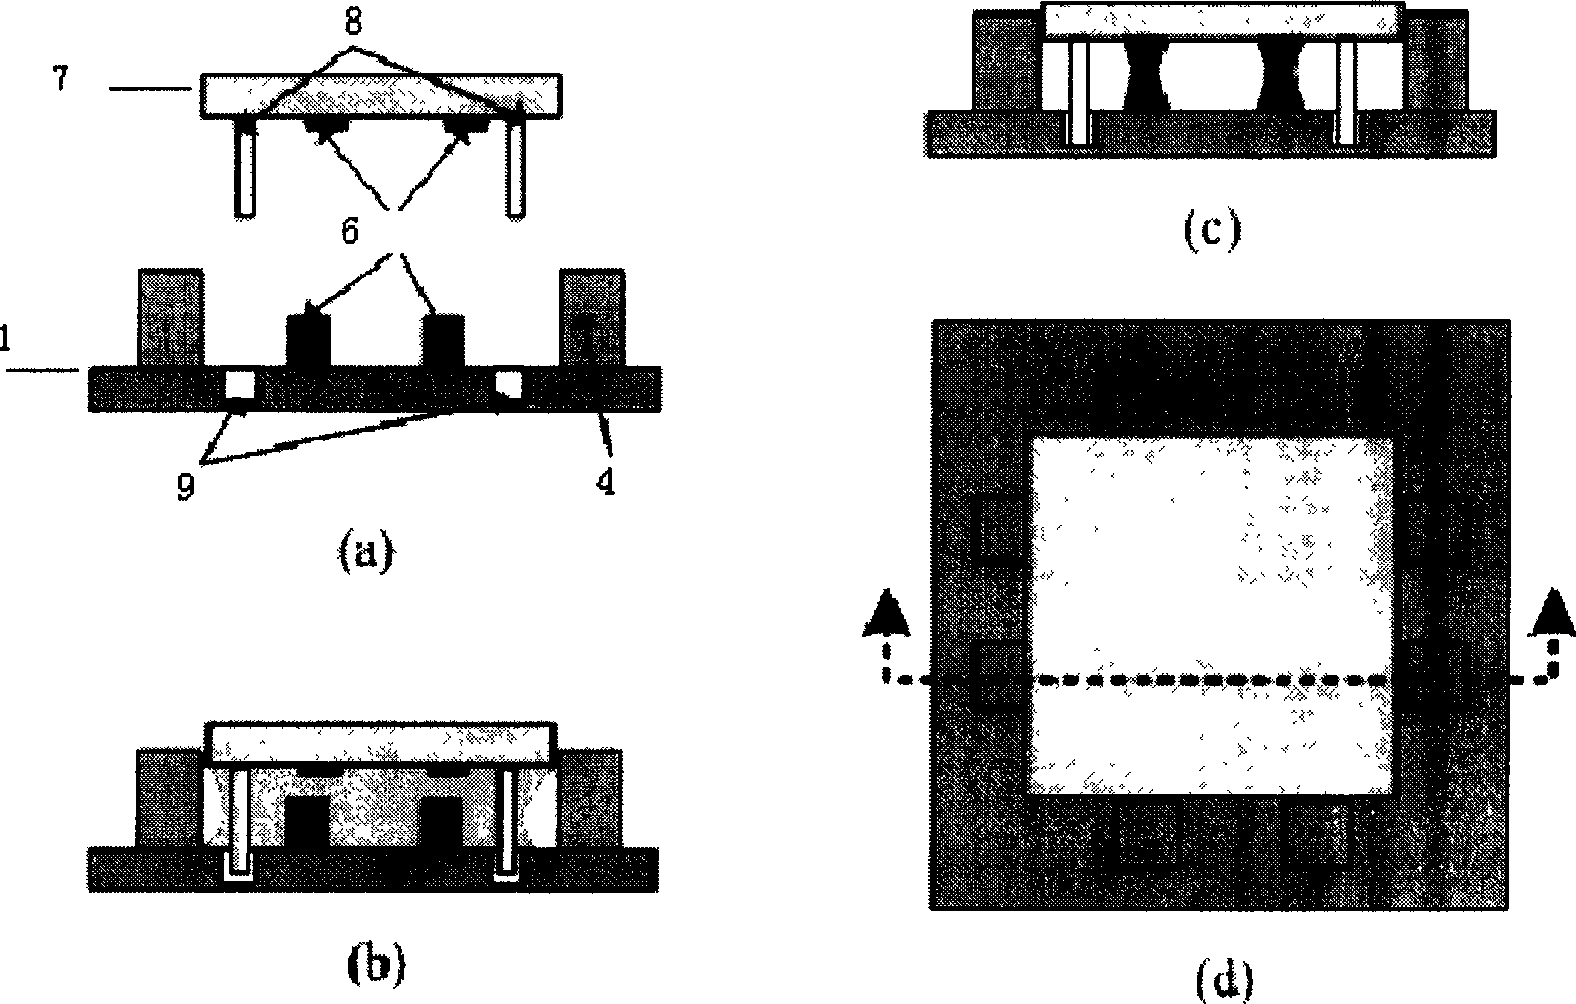 High-precision three-dimensional micro-assembling method and assembly parts based on MEMS